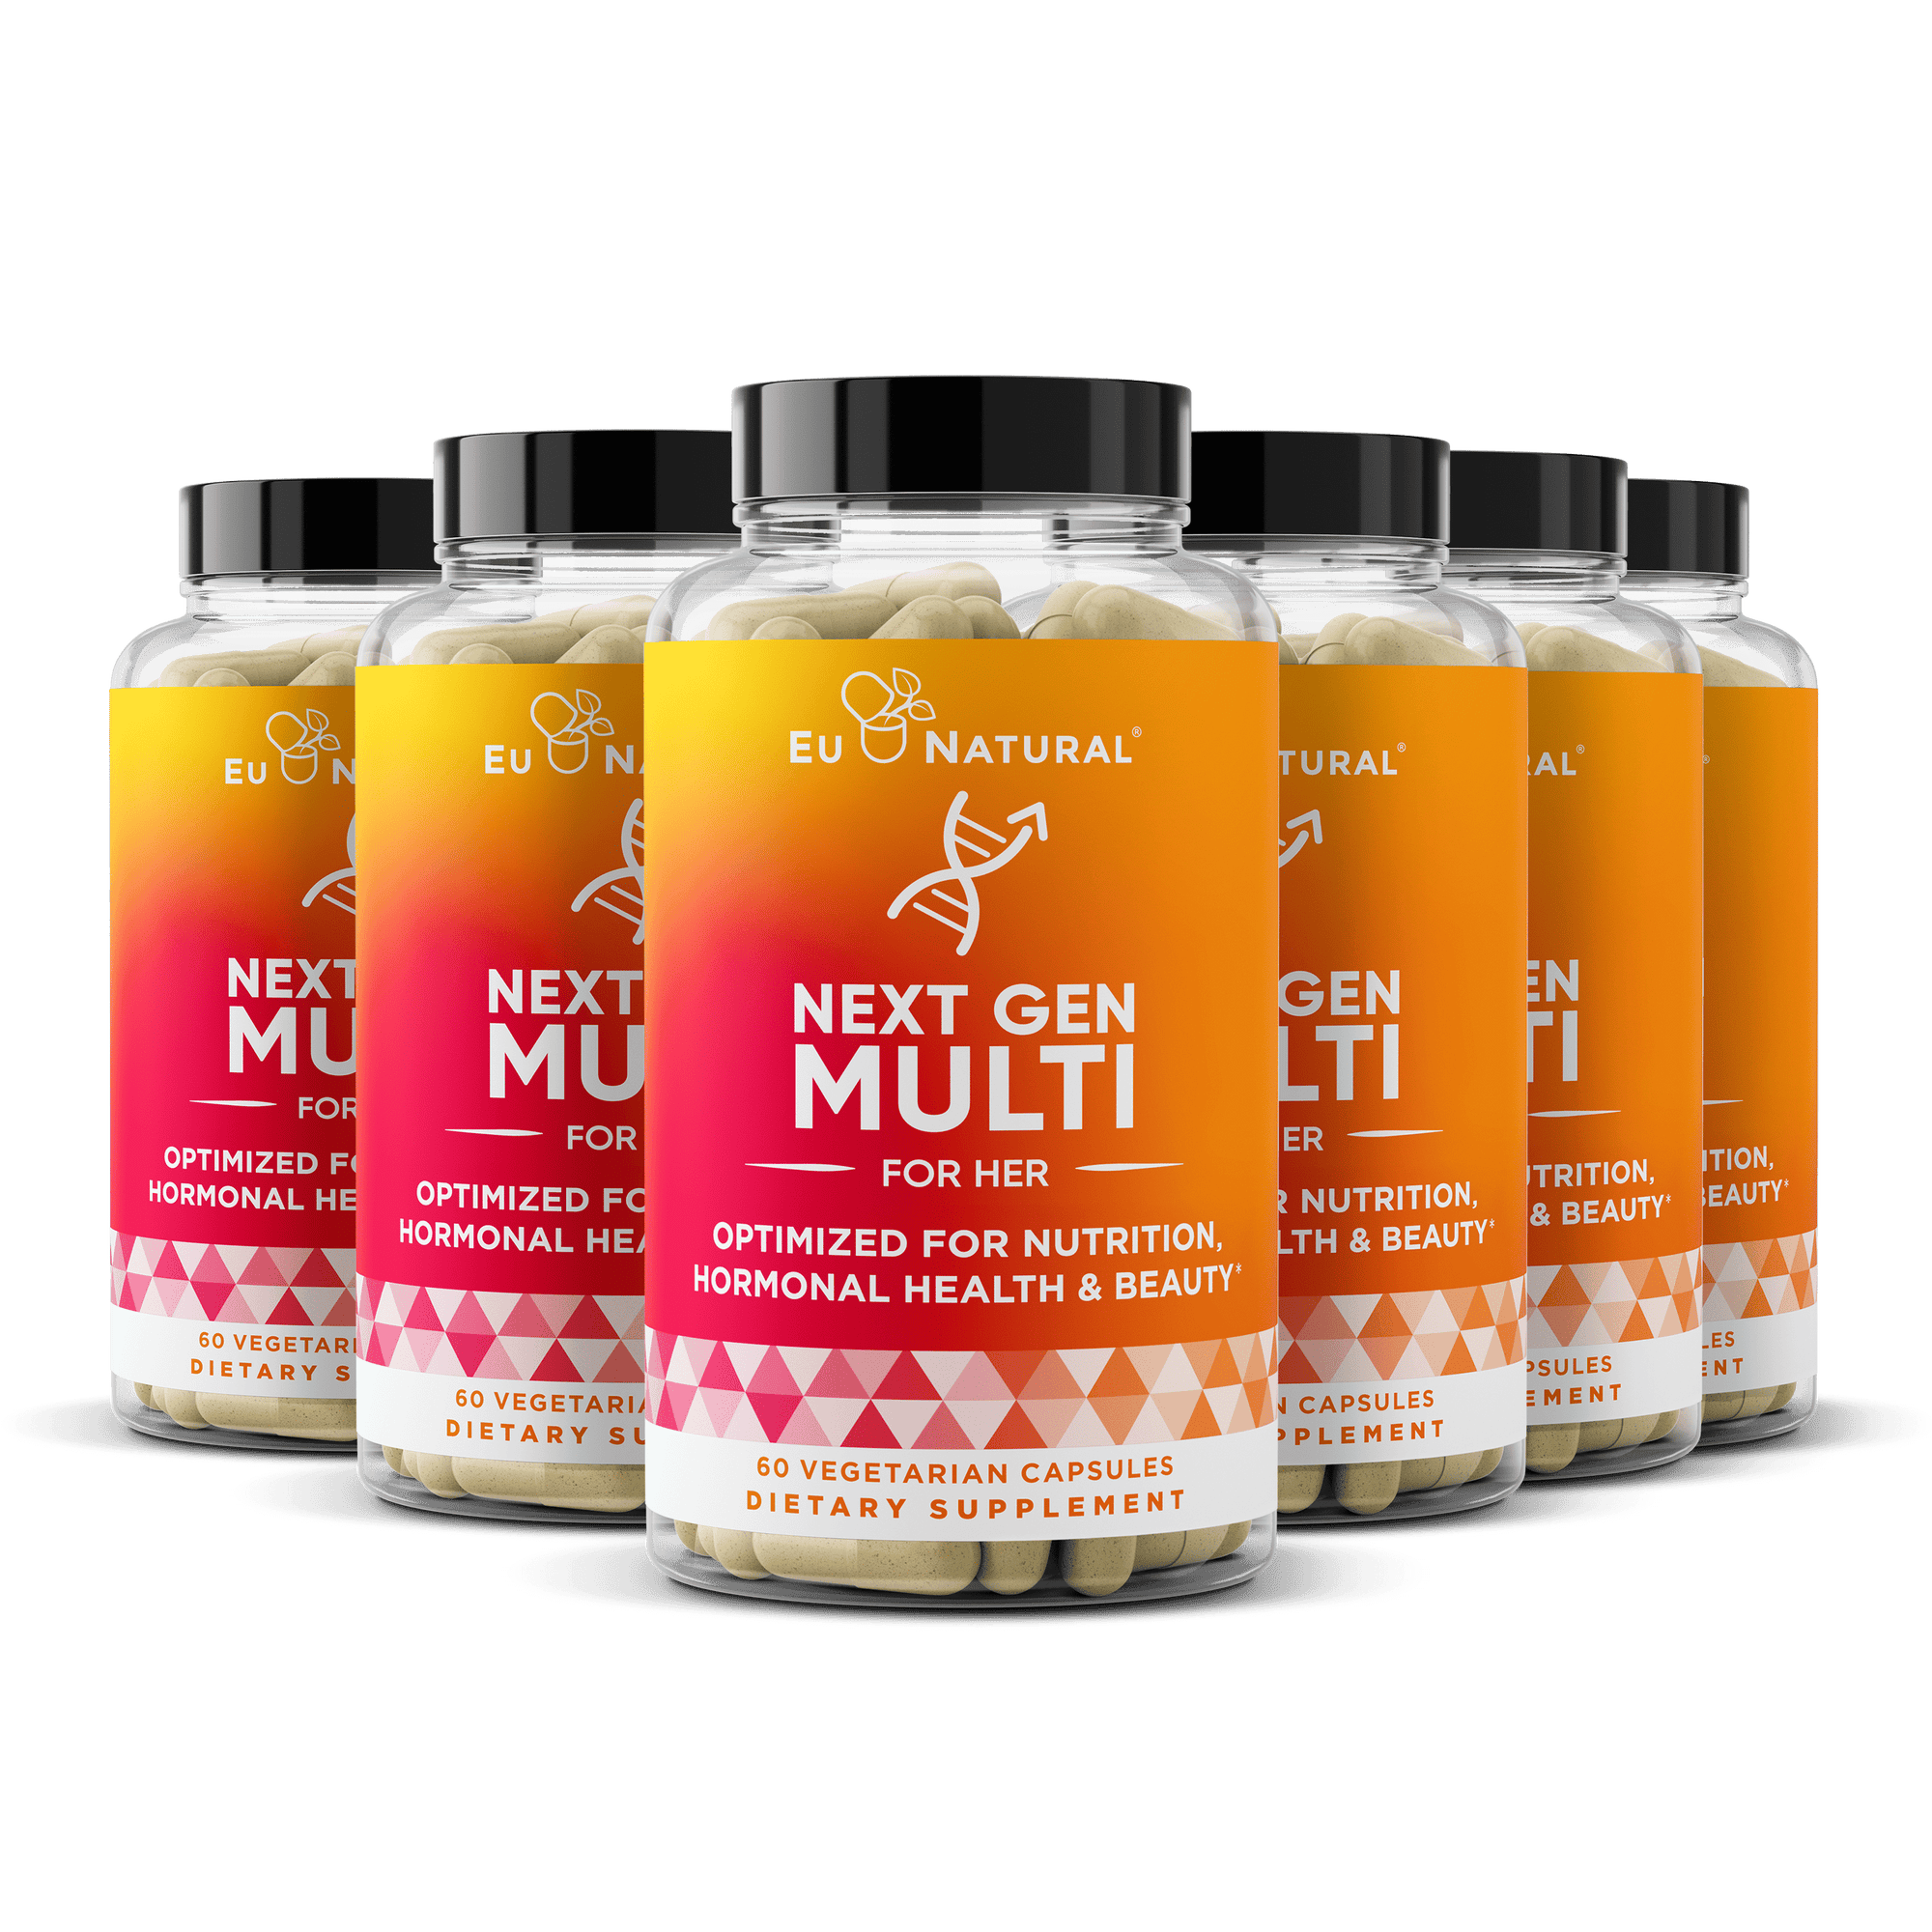 Eu Natural NEXT GEN FOR HER MULTIVITAMIN FOR WOMEN 6 PACK (formally known as ESSENTIALS, packaging may vary)